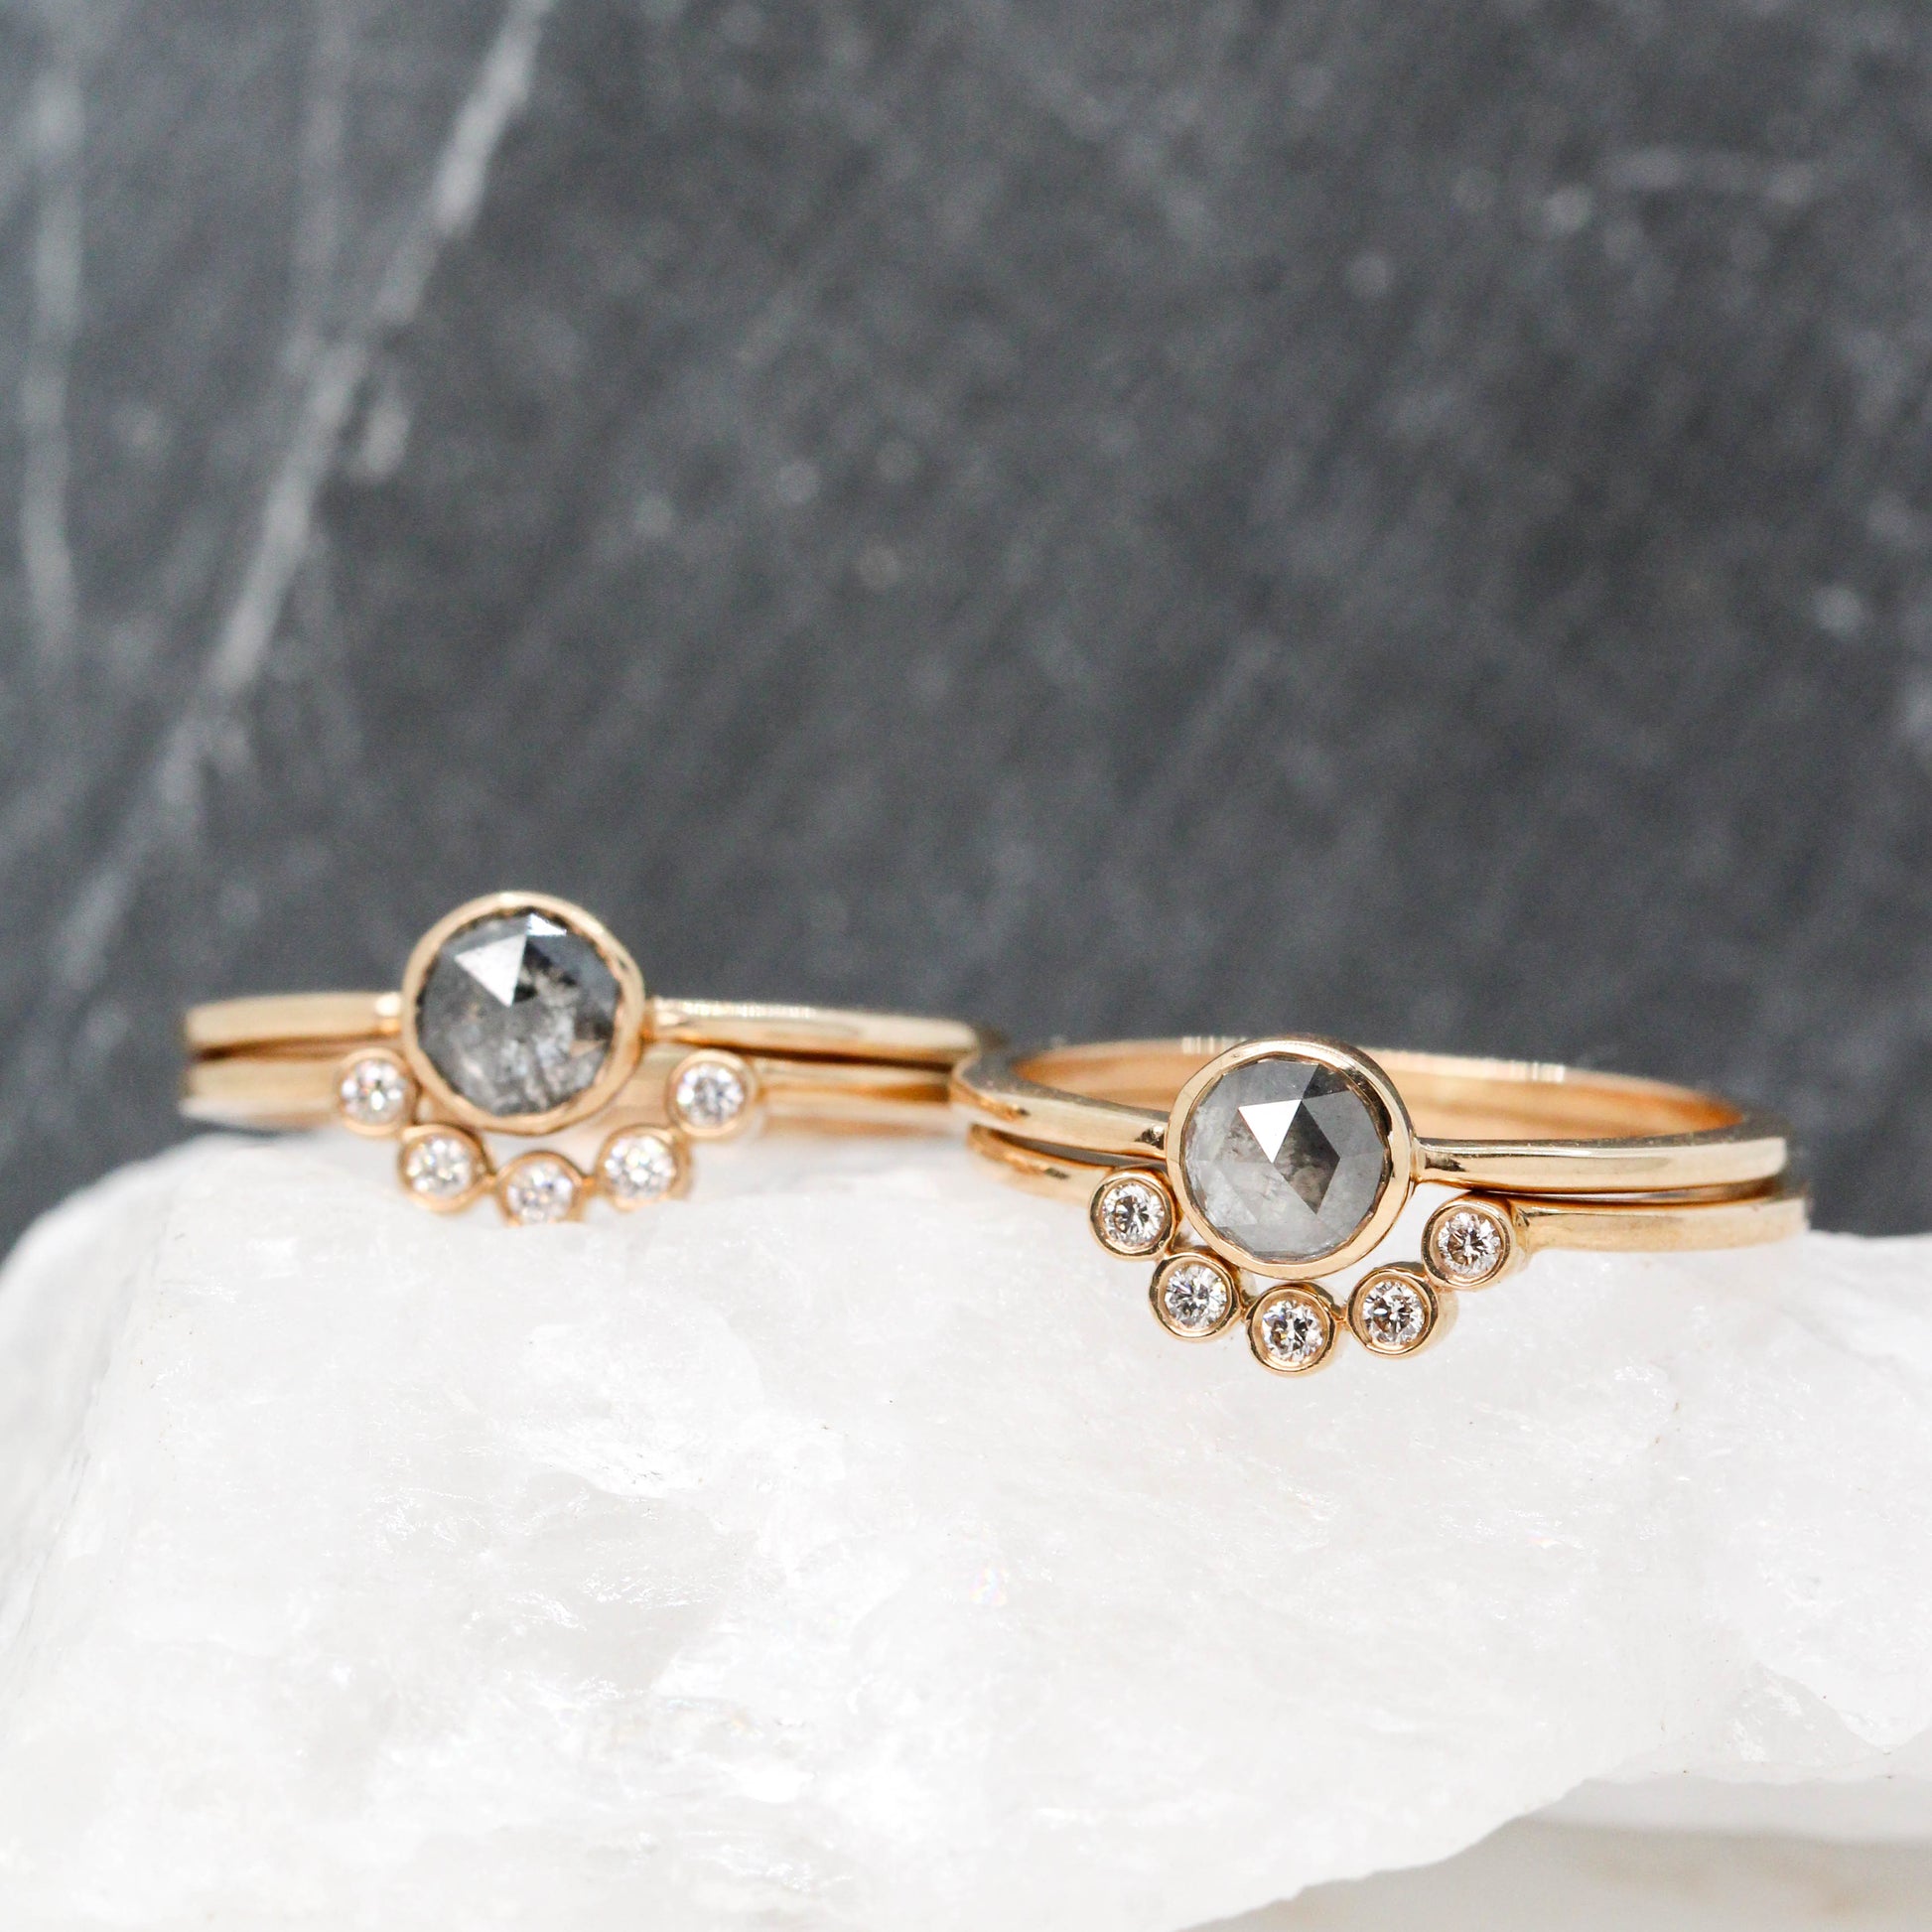 Bezel Ring Set - Rose Cut Solitaire Ring with Matching Band in 14k Champagne Gold - Ready to Ship - Midwinter Co. Alternative Bridal Rings and Modern Fine Jewelry